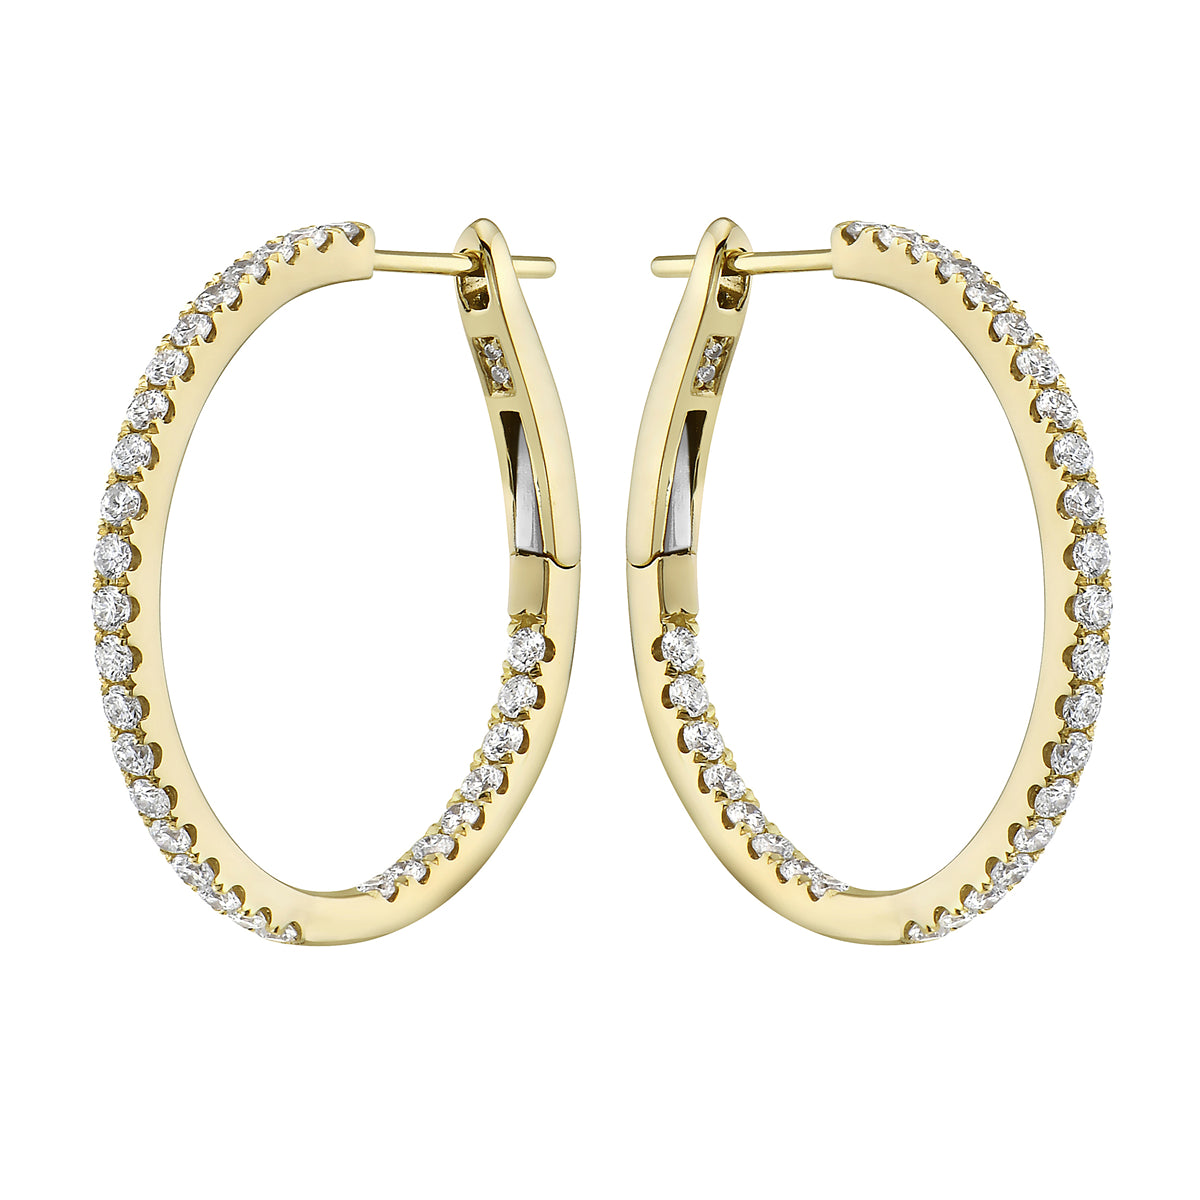 1.0 in Yellow Gold Inside and Out Diamond Hoop Earrings